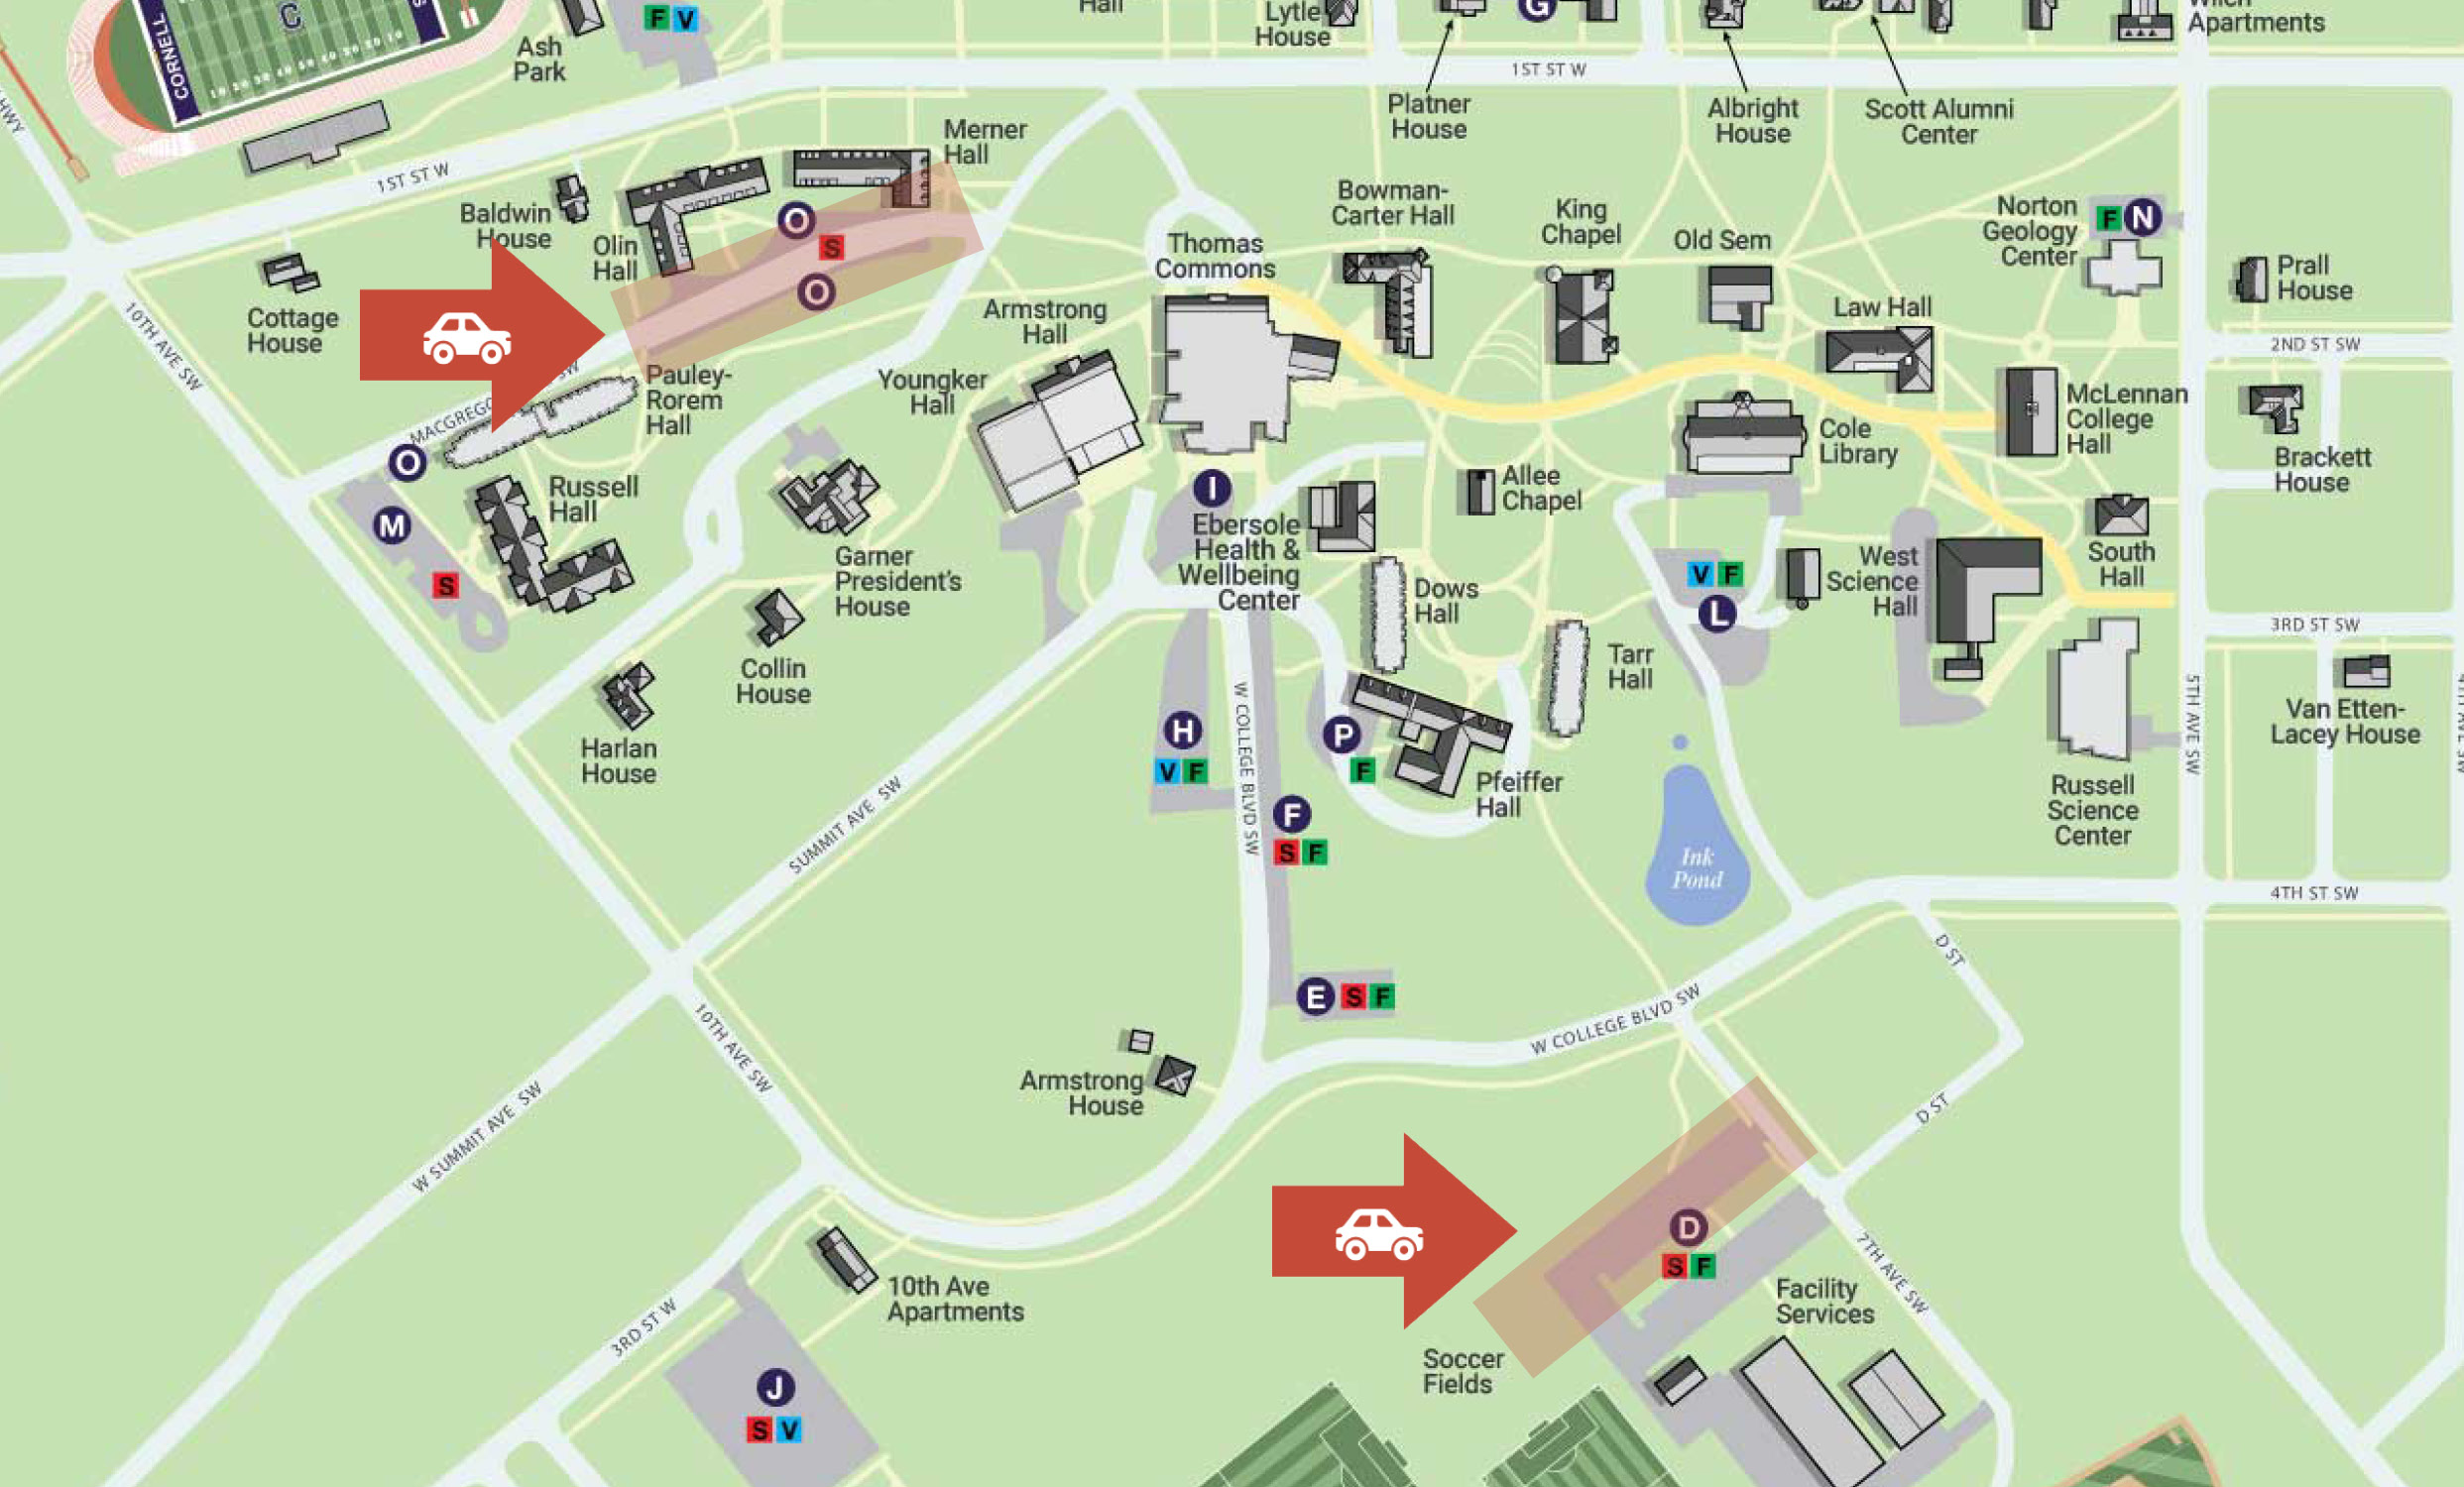 Campus map with summer parking locations highlighted.